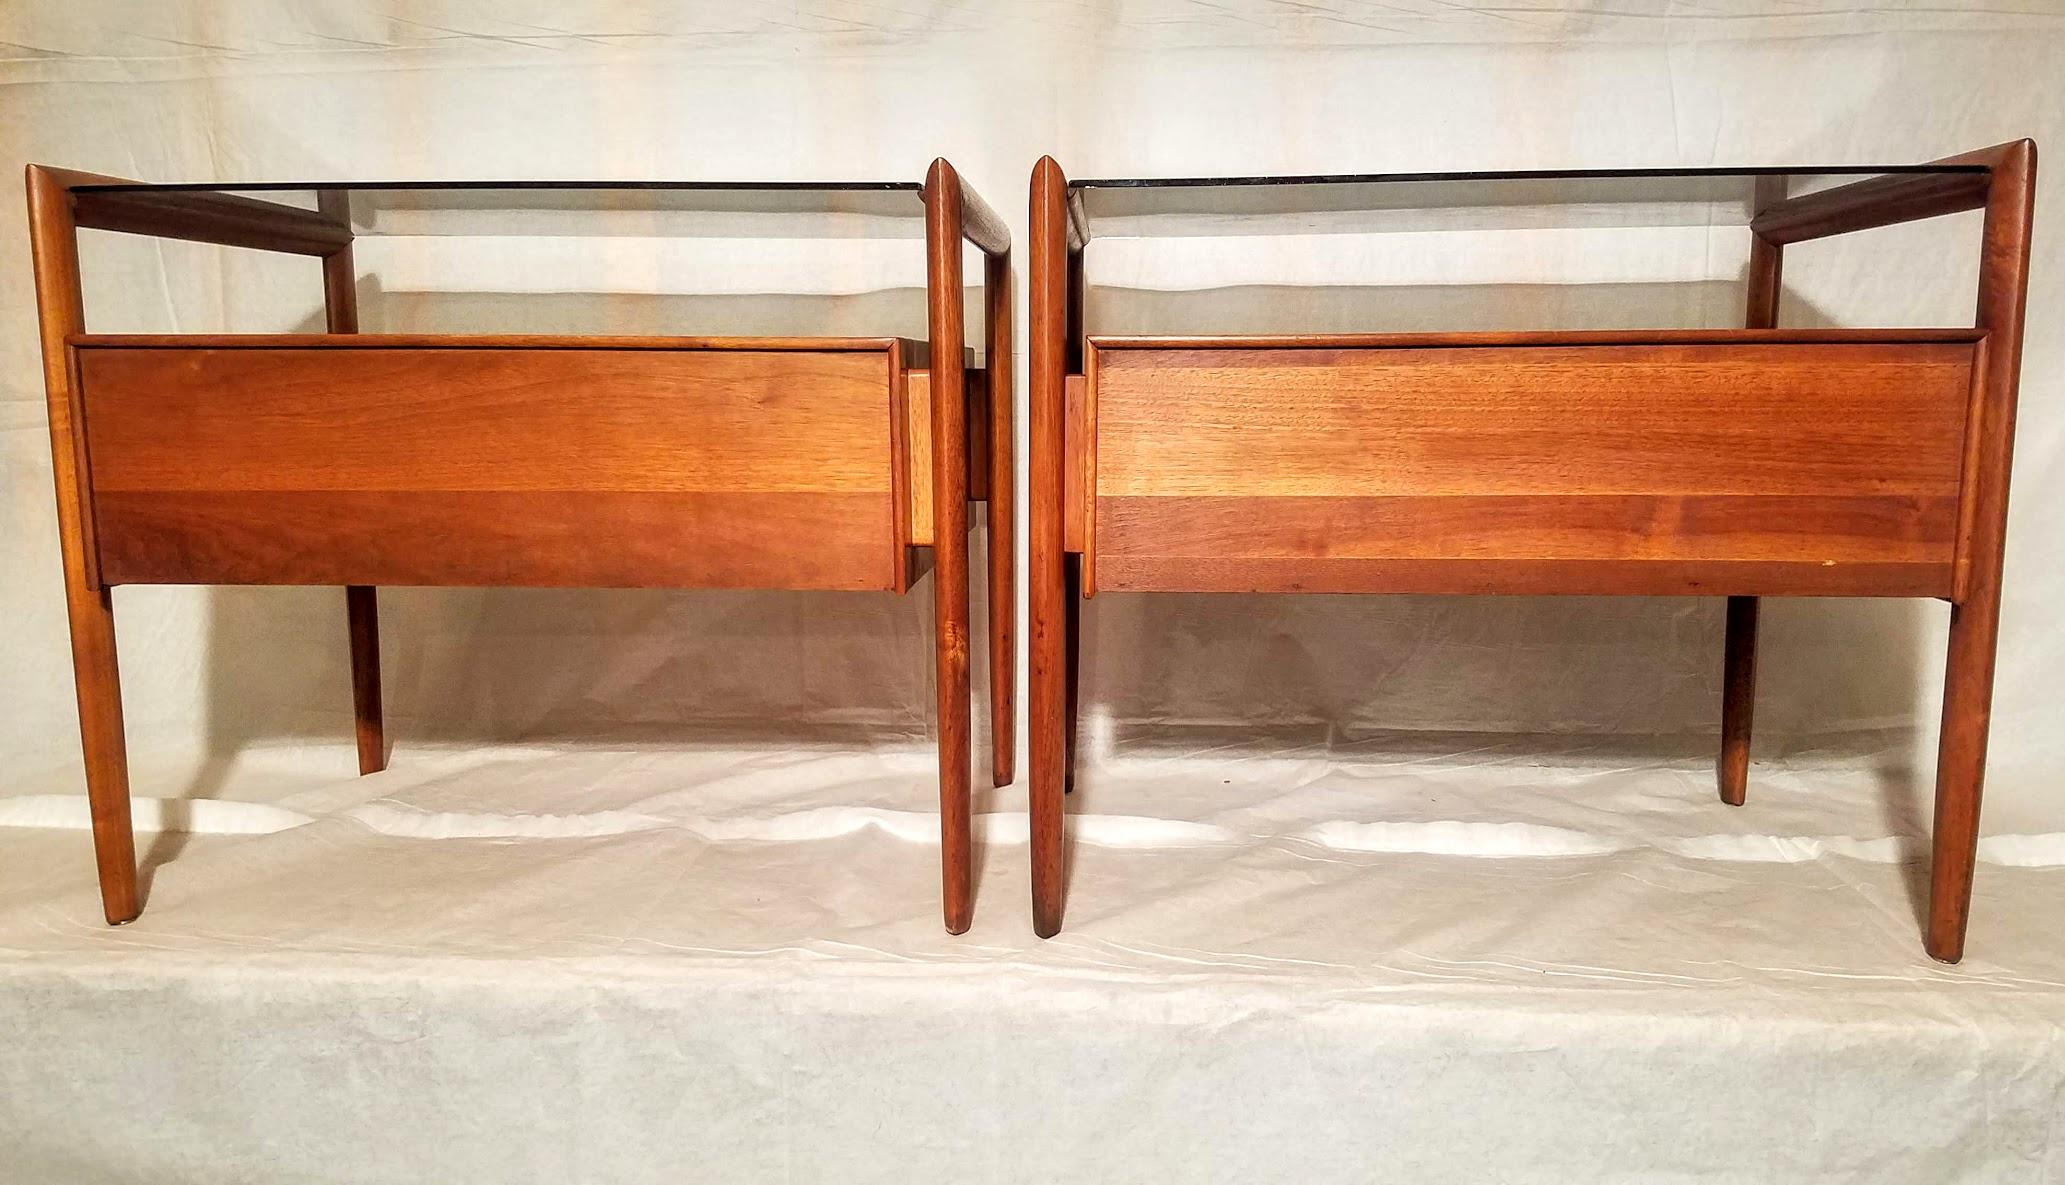 A pair of end tables or nightstands by Barney Flagg for Drexel Furniture Company High Point, North Carolina from the 1960s.
The nightstands are in excellent vintage condition. 
The price is for the pair.
